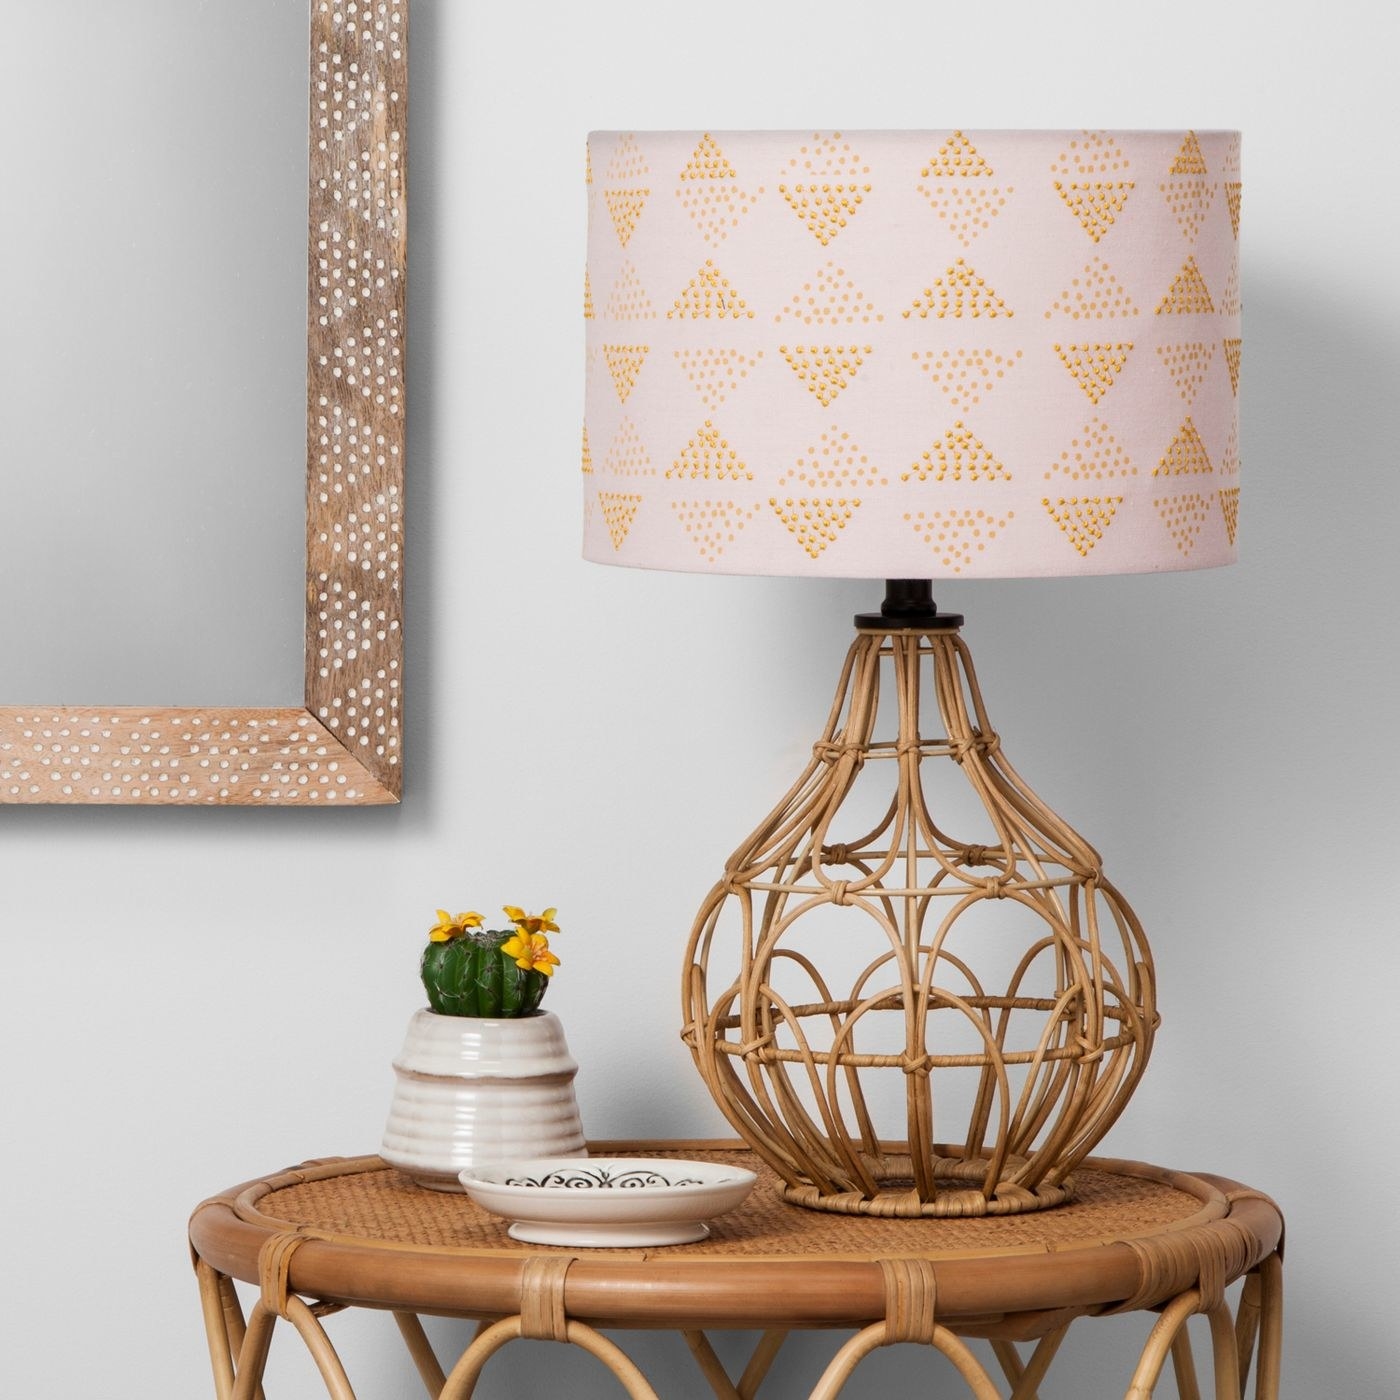 A rattan table lamp